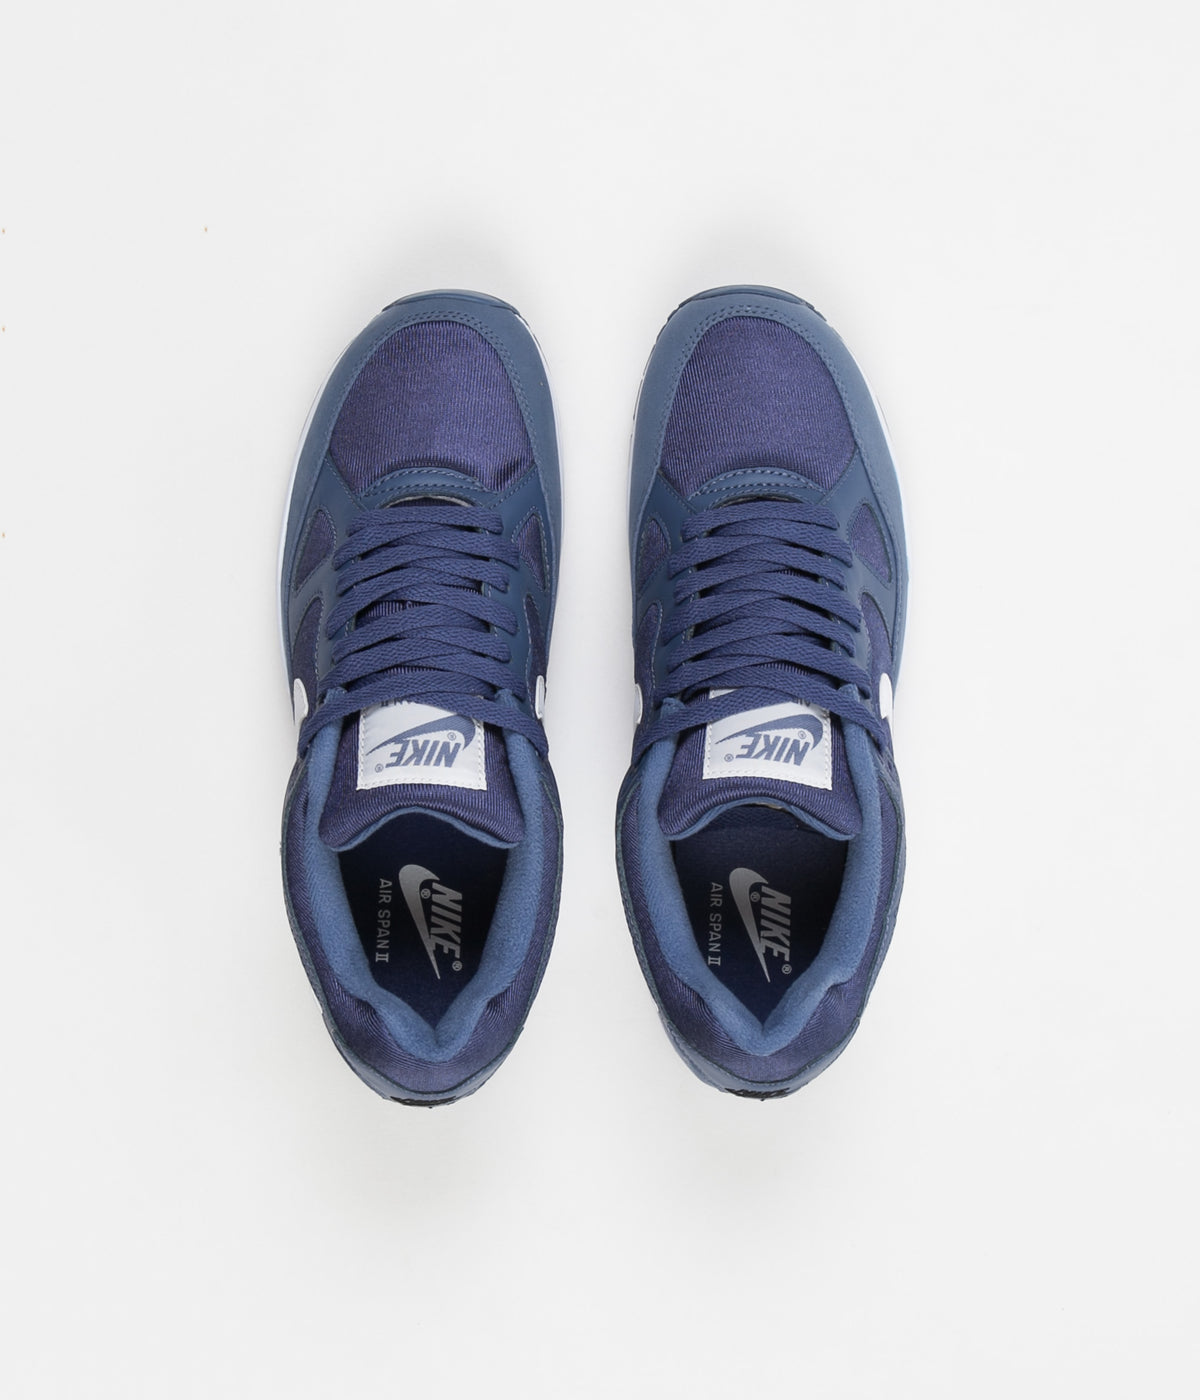 Nike Air Span II Shoes - Diffused Blue / White - Blue - Black | Always in Colour